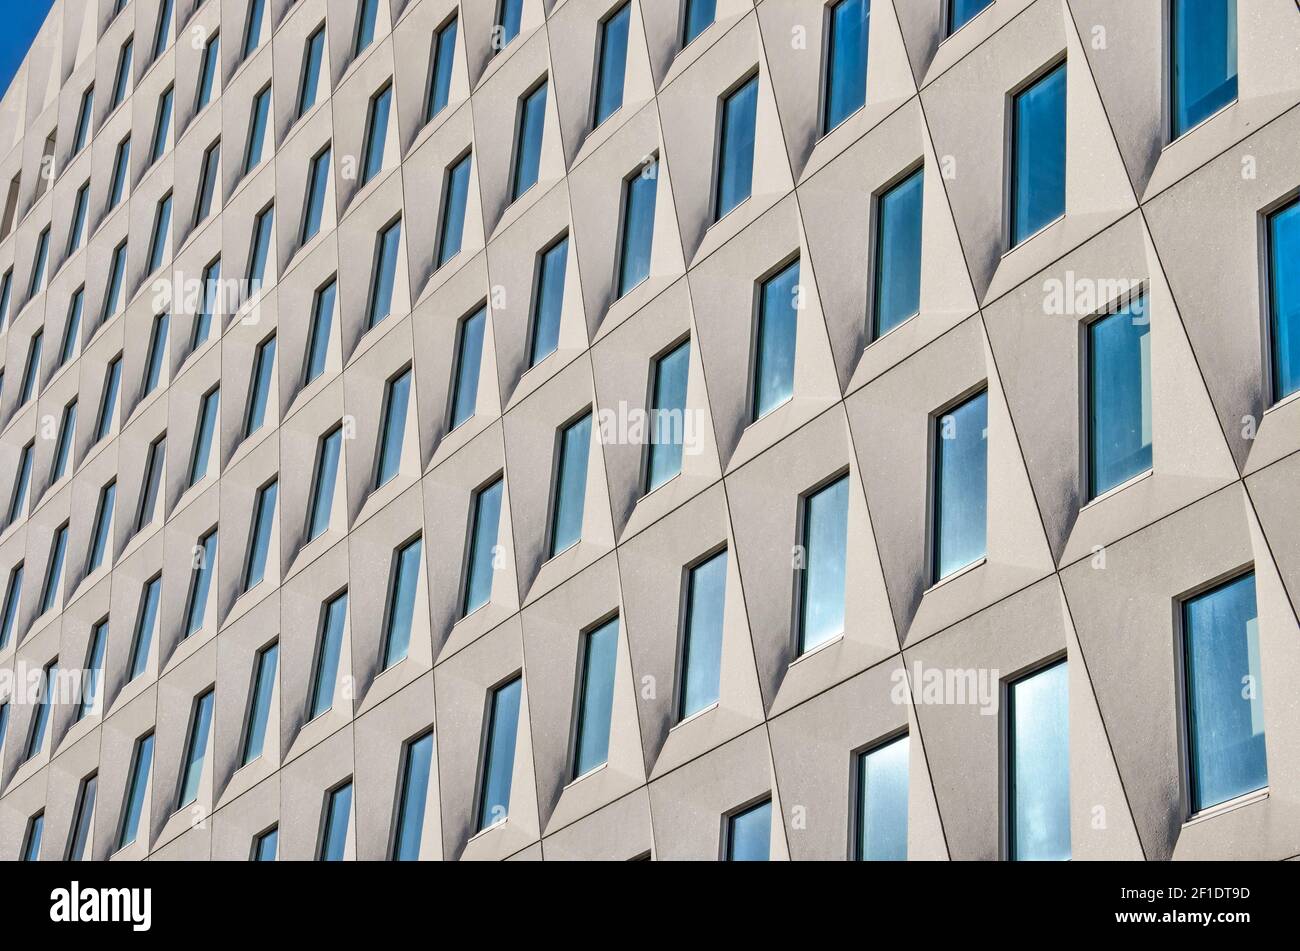 The Hague, The Netherlands, February 13, 2021: the facade of the apartments and municipal offices at Layweg, with trapezoid prefab concrete elements Stock Photo